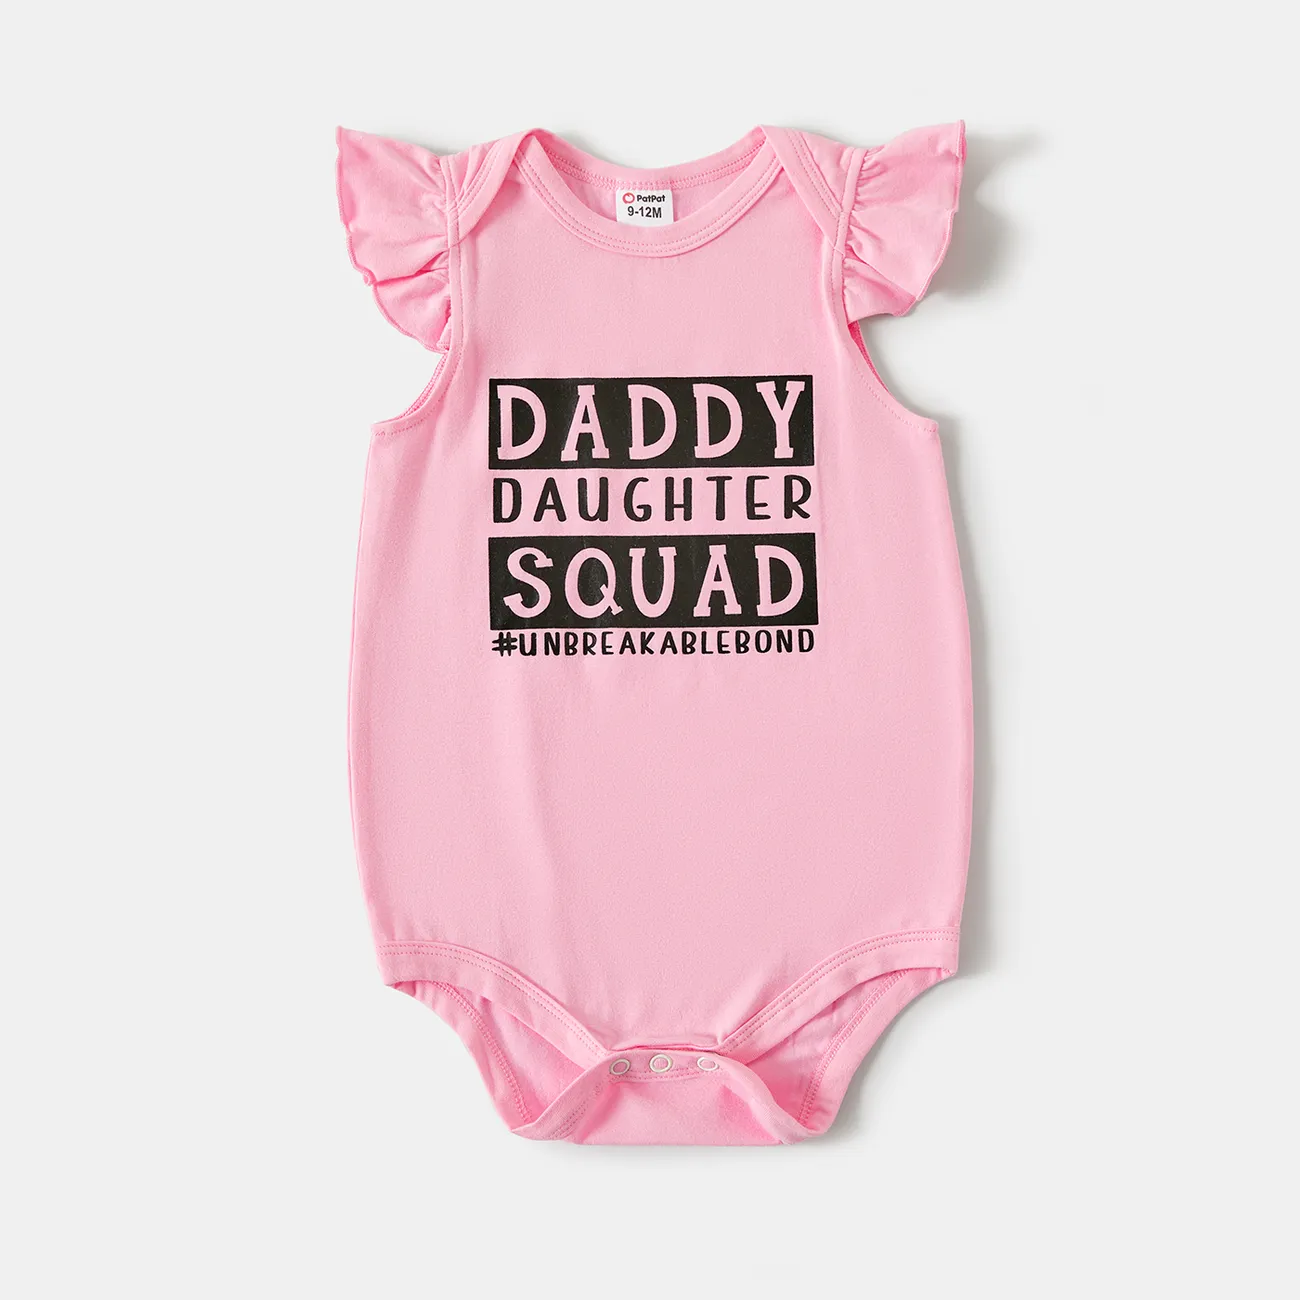 Daddy and Me Letter Print Short-sleeve Cotton Tee Pink big image 1